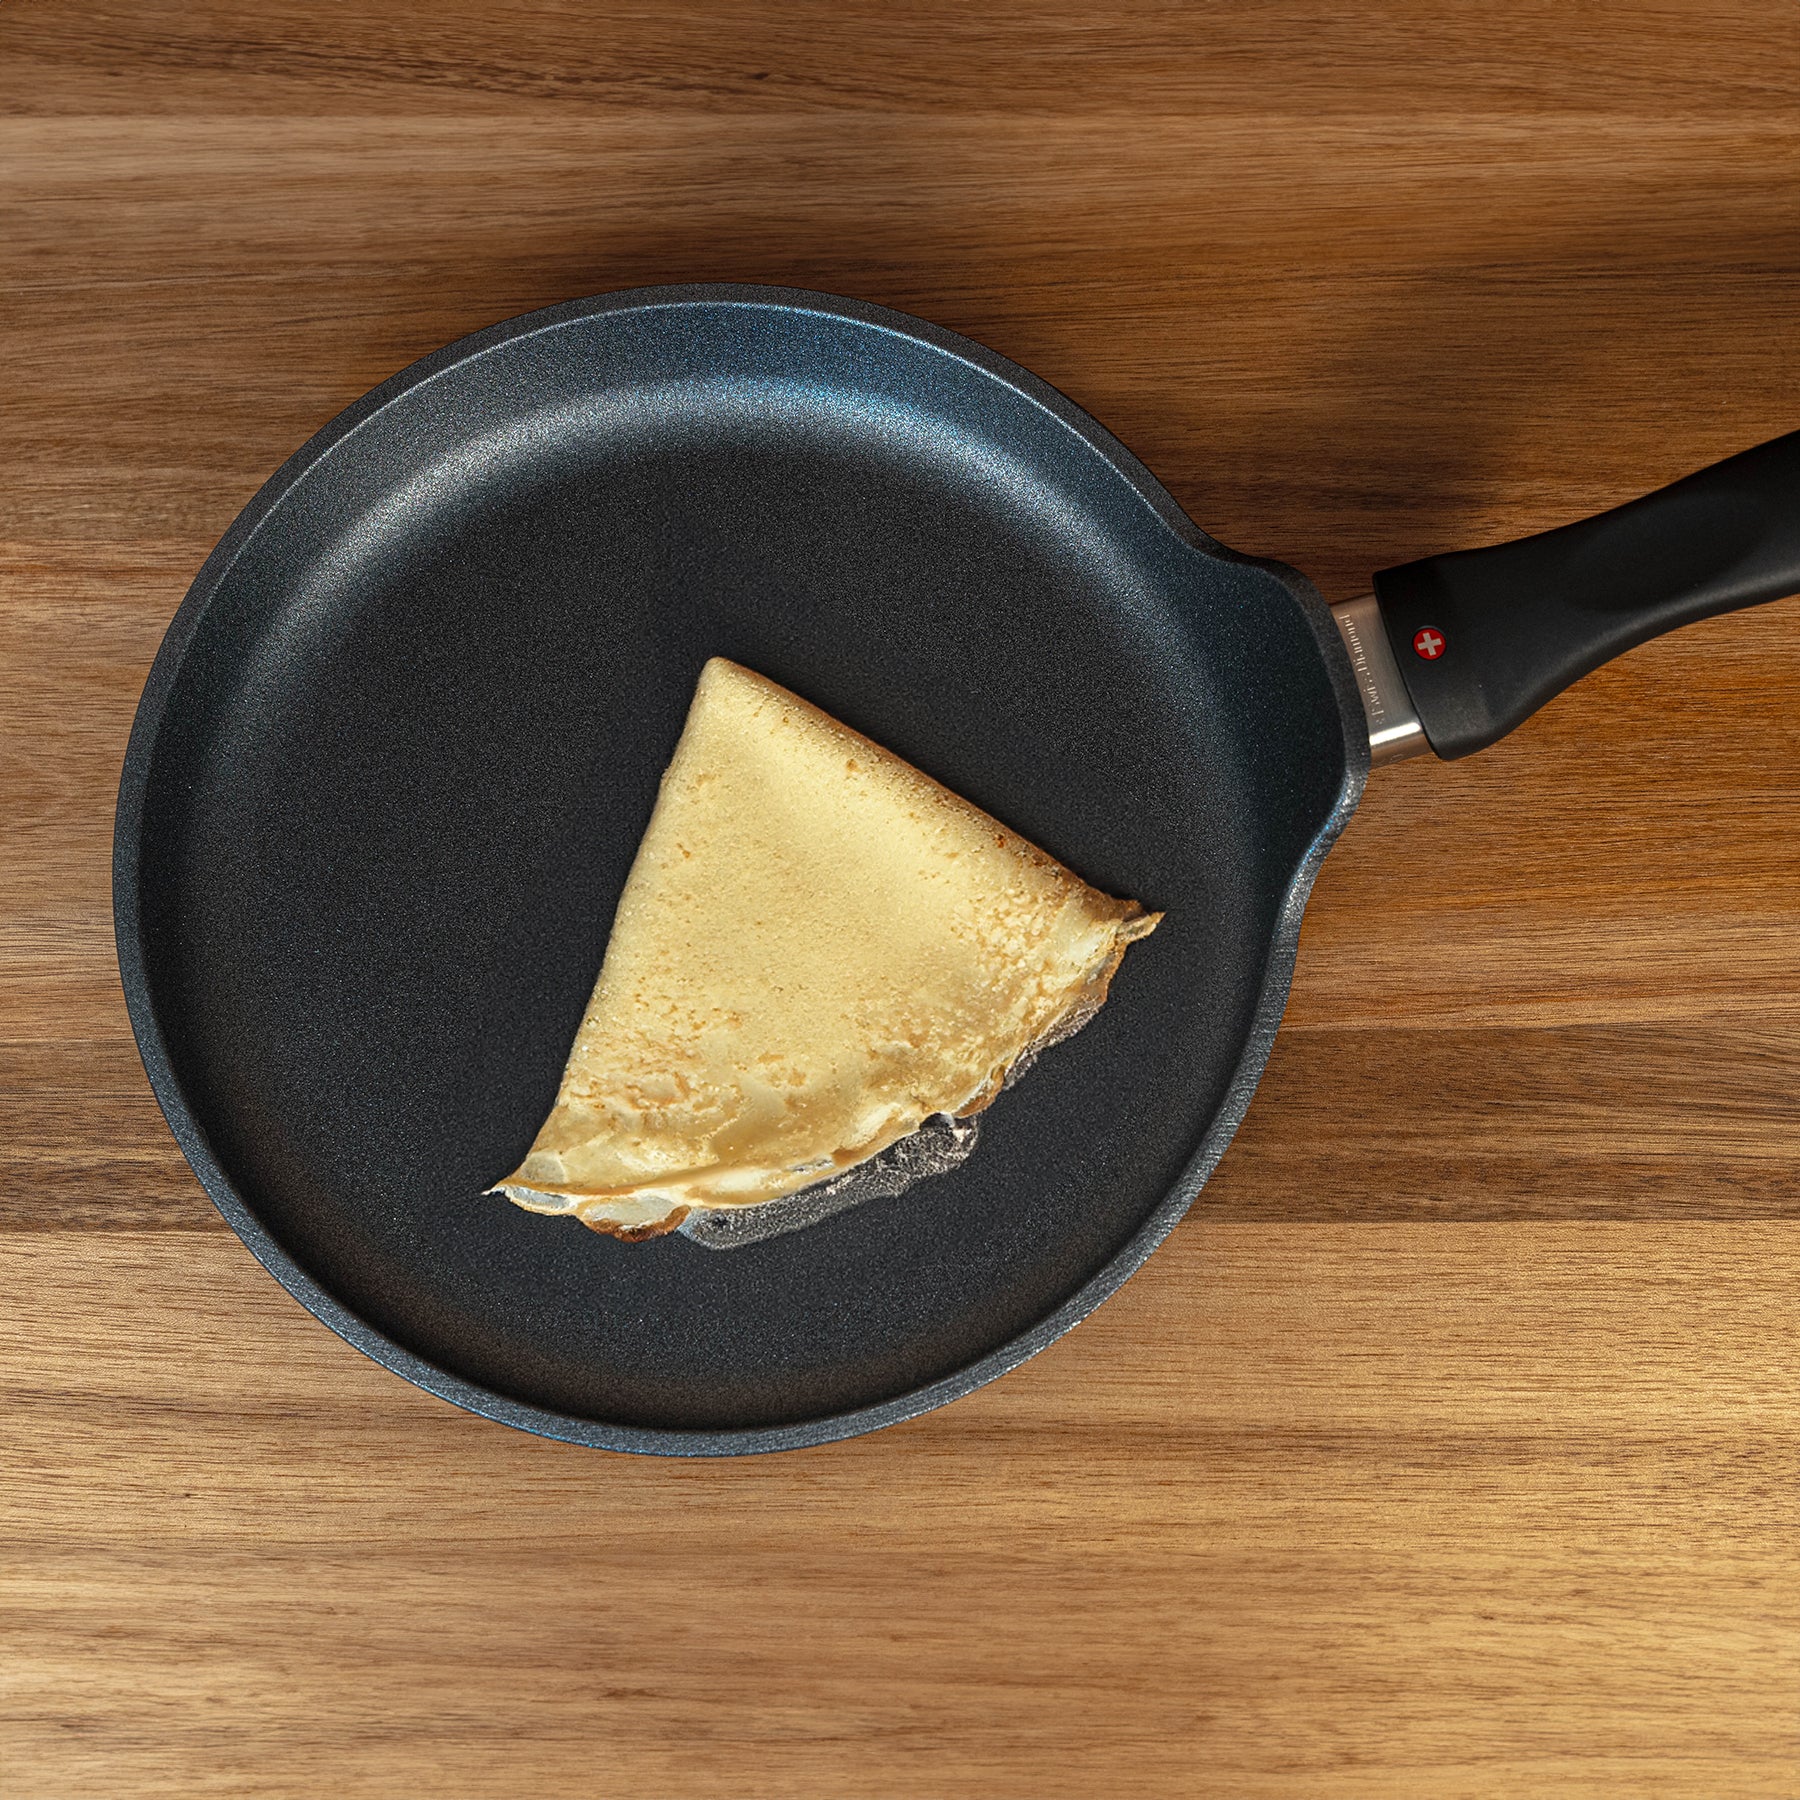 XD Nonstick Crepe Pan top view with food on pan sitting on a wooden table